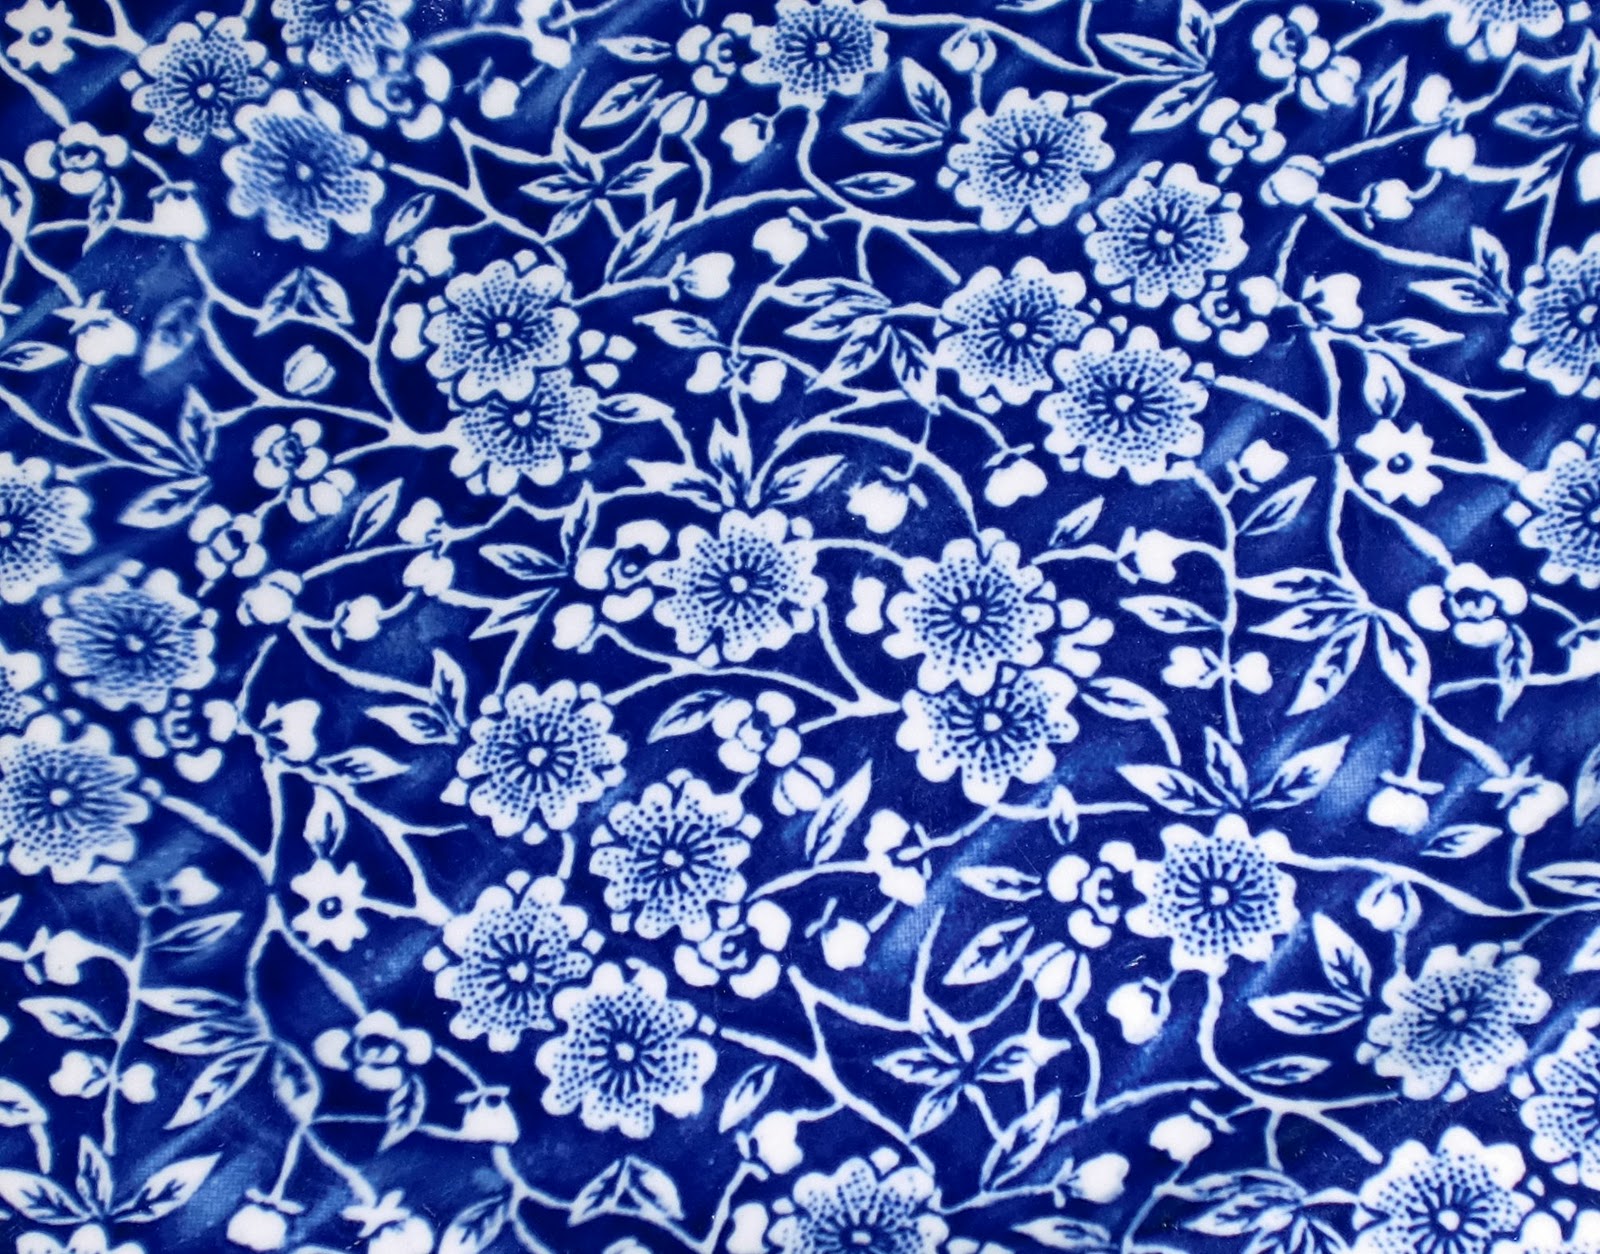 Burleigh Calico China Pattern - Floral China Blue Pattern - HD Wallpaper 